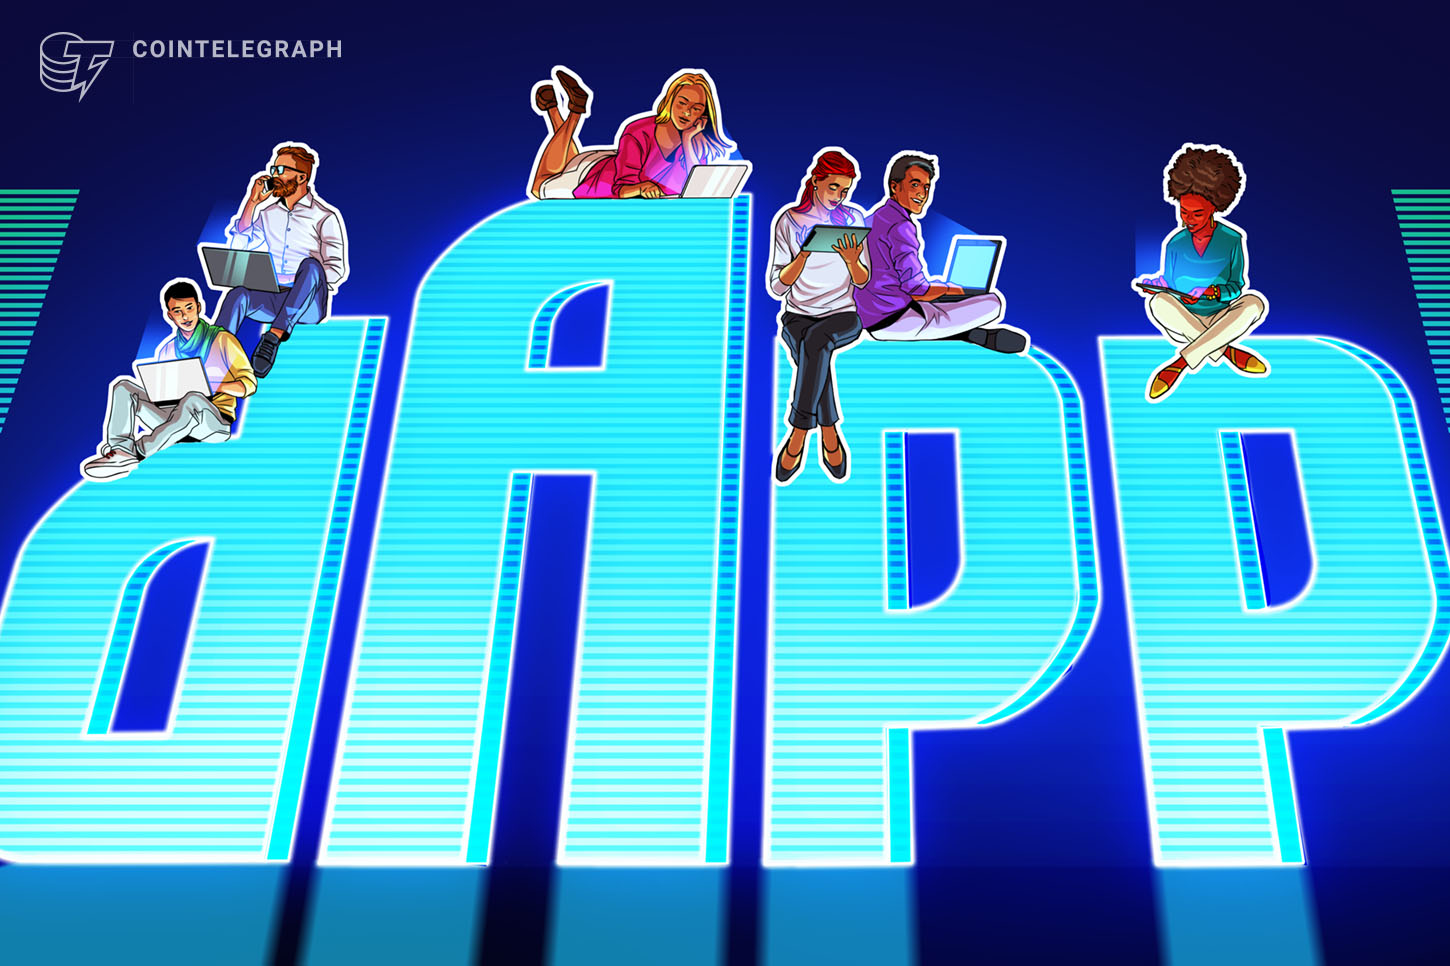 From Uniswap to Axies, these 6 DApps blew us away in 2020